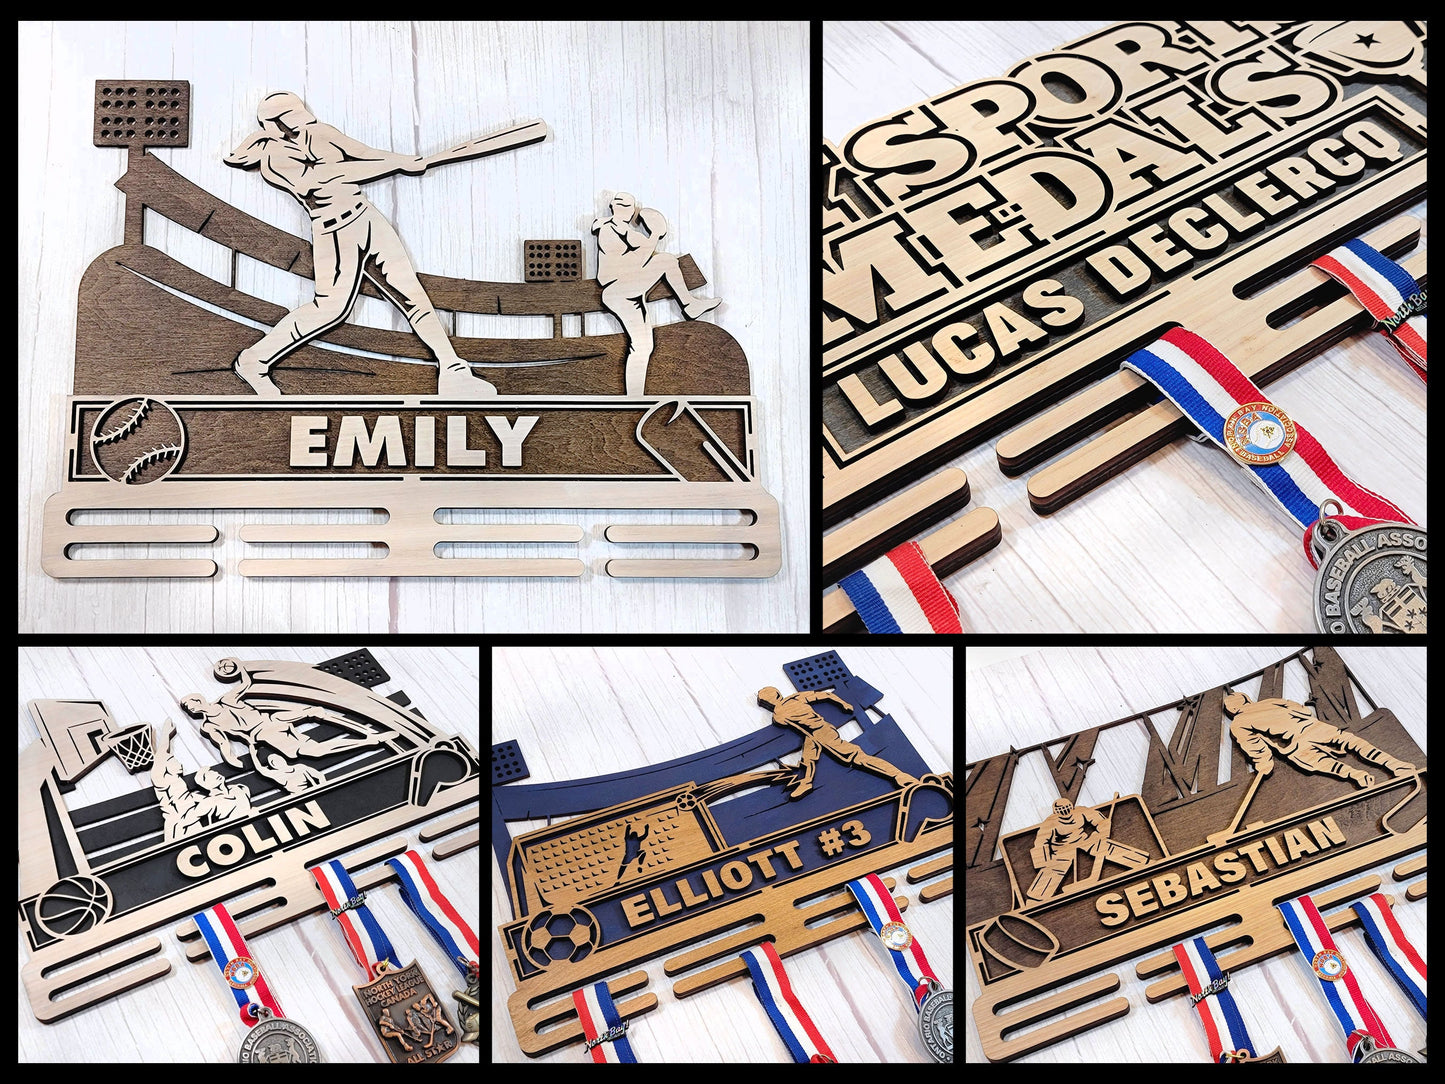 Stadium Series Medal Holders - 5 Sports and 1 Universal Holder - Male and Female Versions Included - SVG Files - Sized for Glowforge